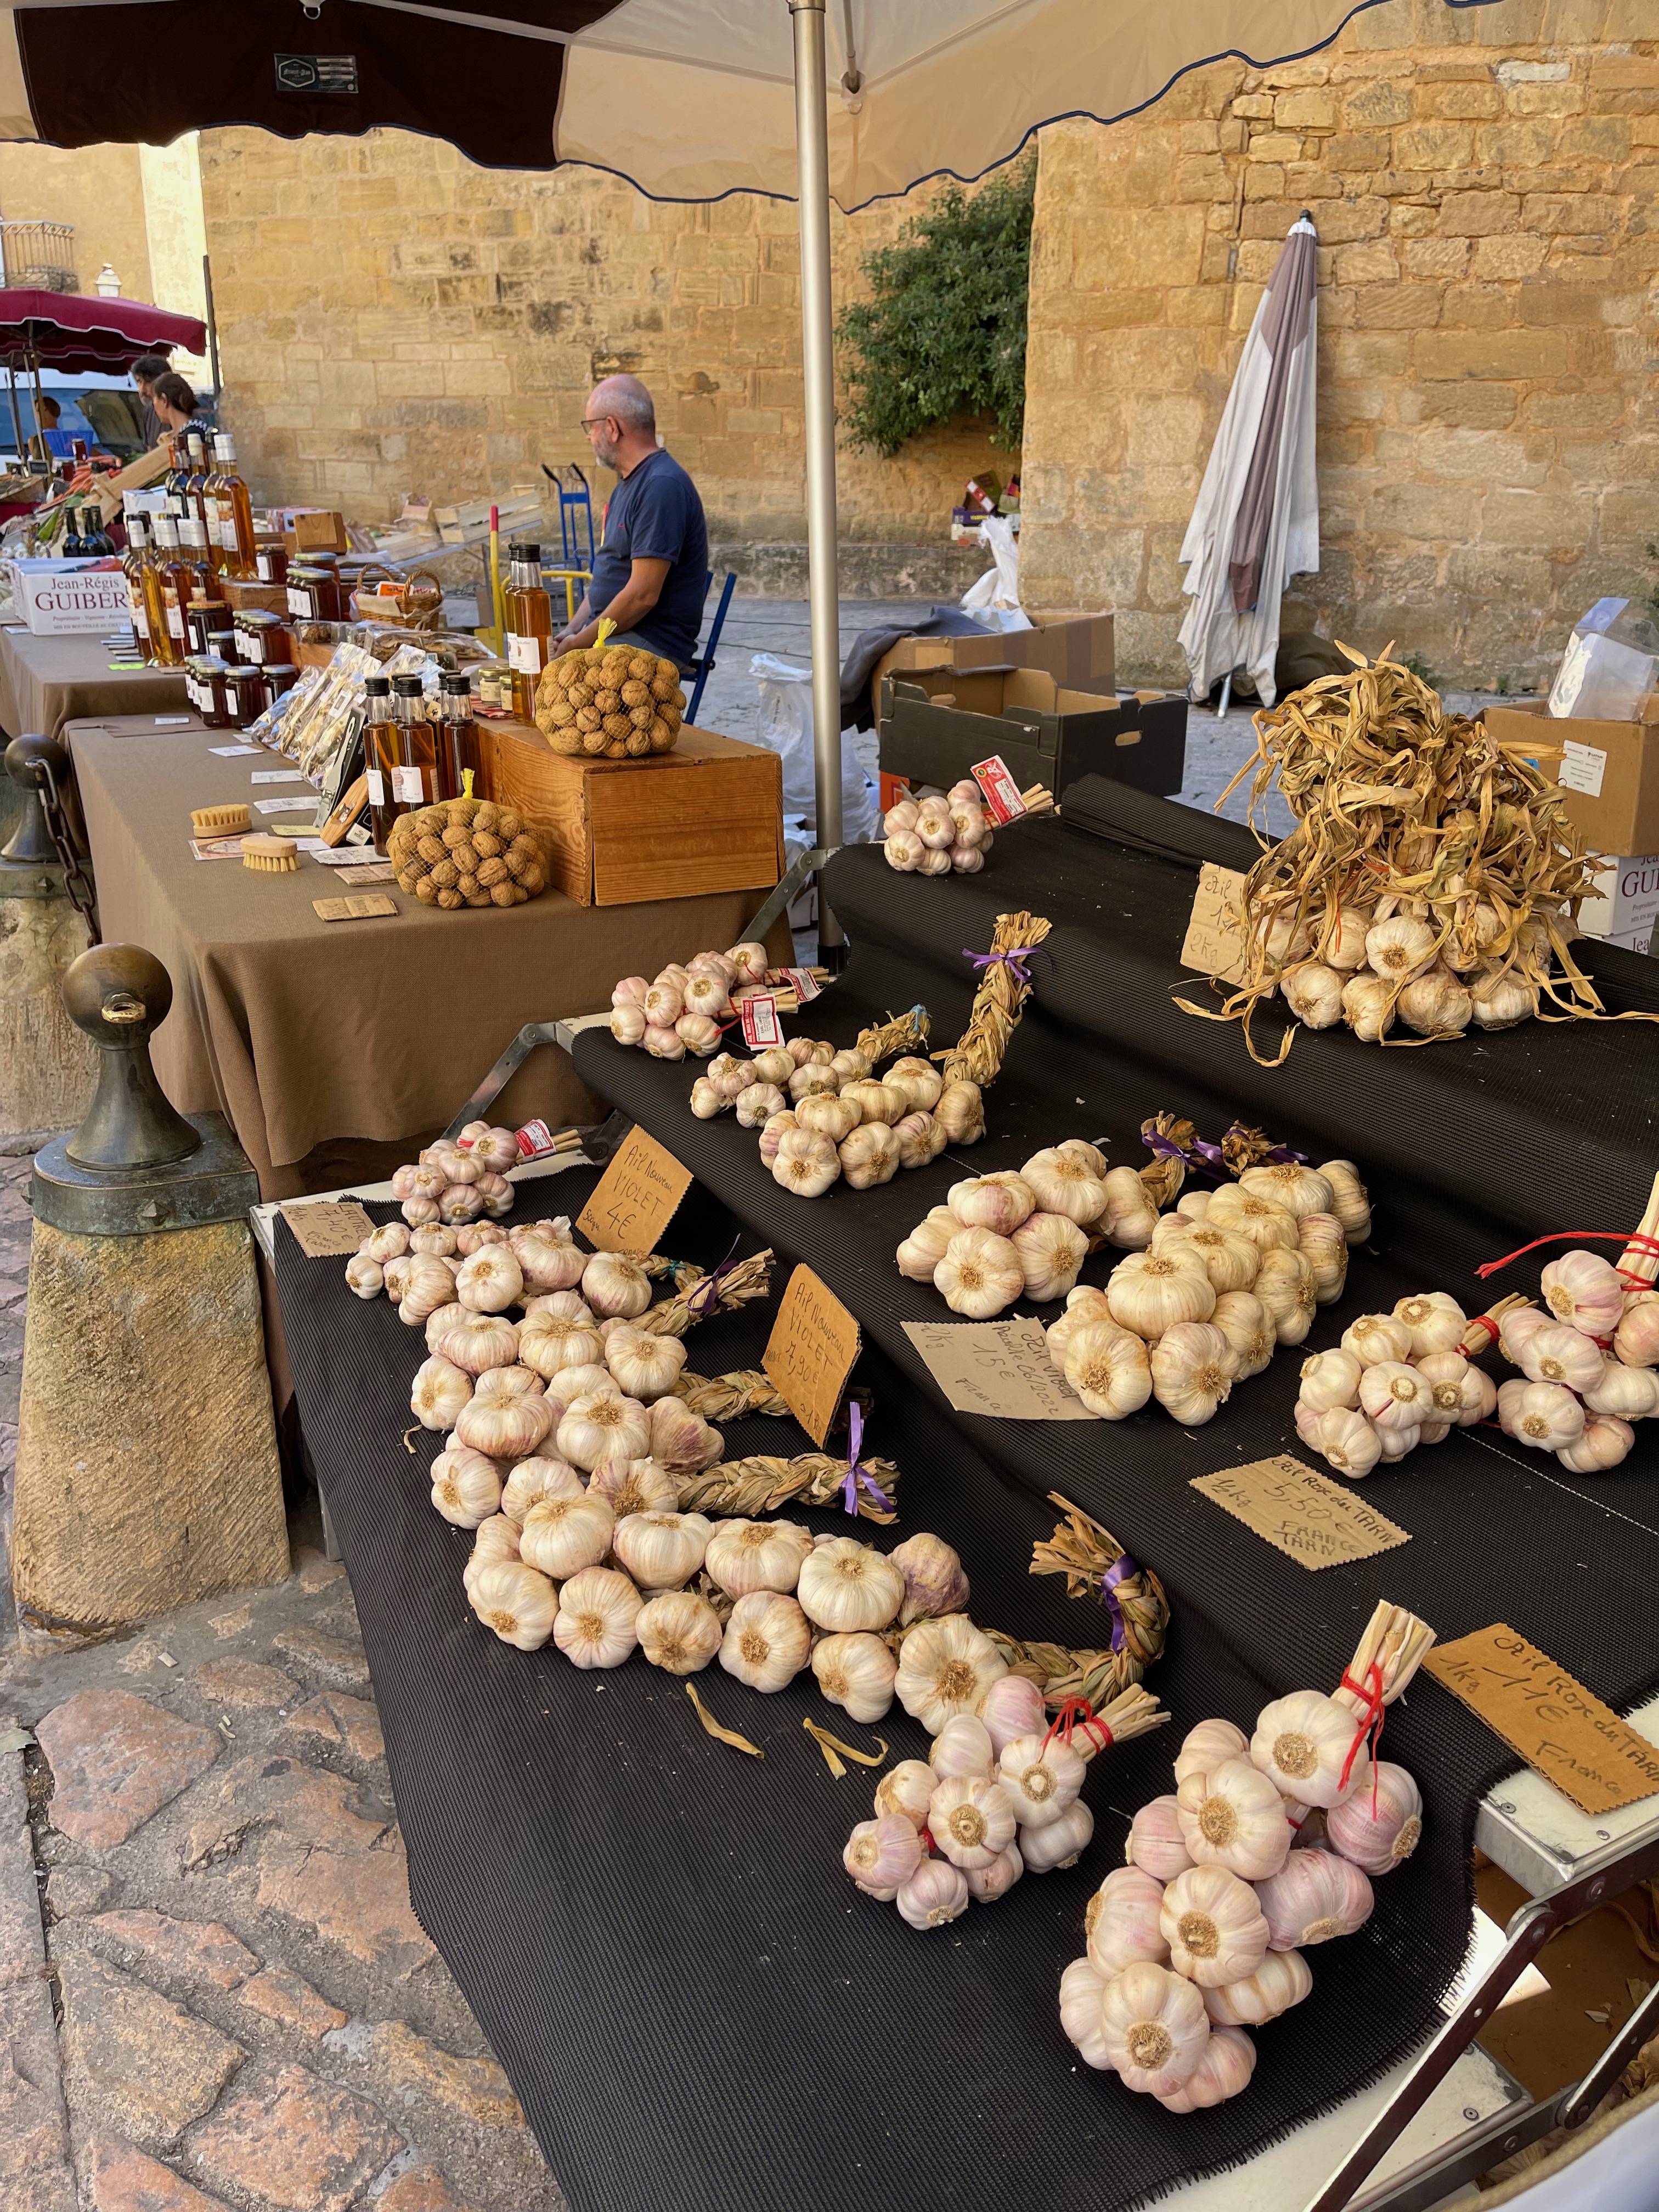 A day visiting Sarlat-la-Canéda – What to see and do